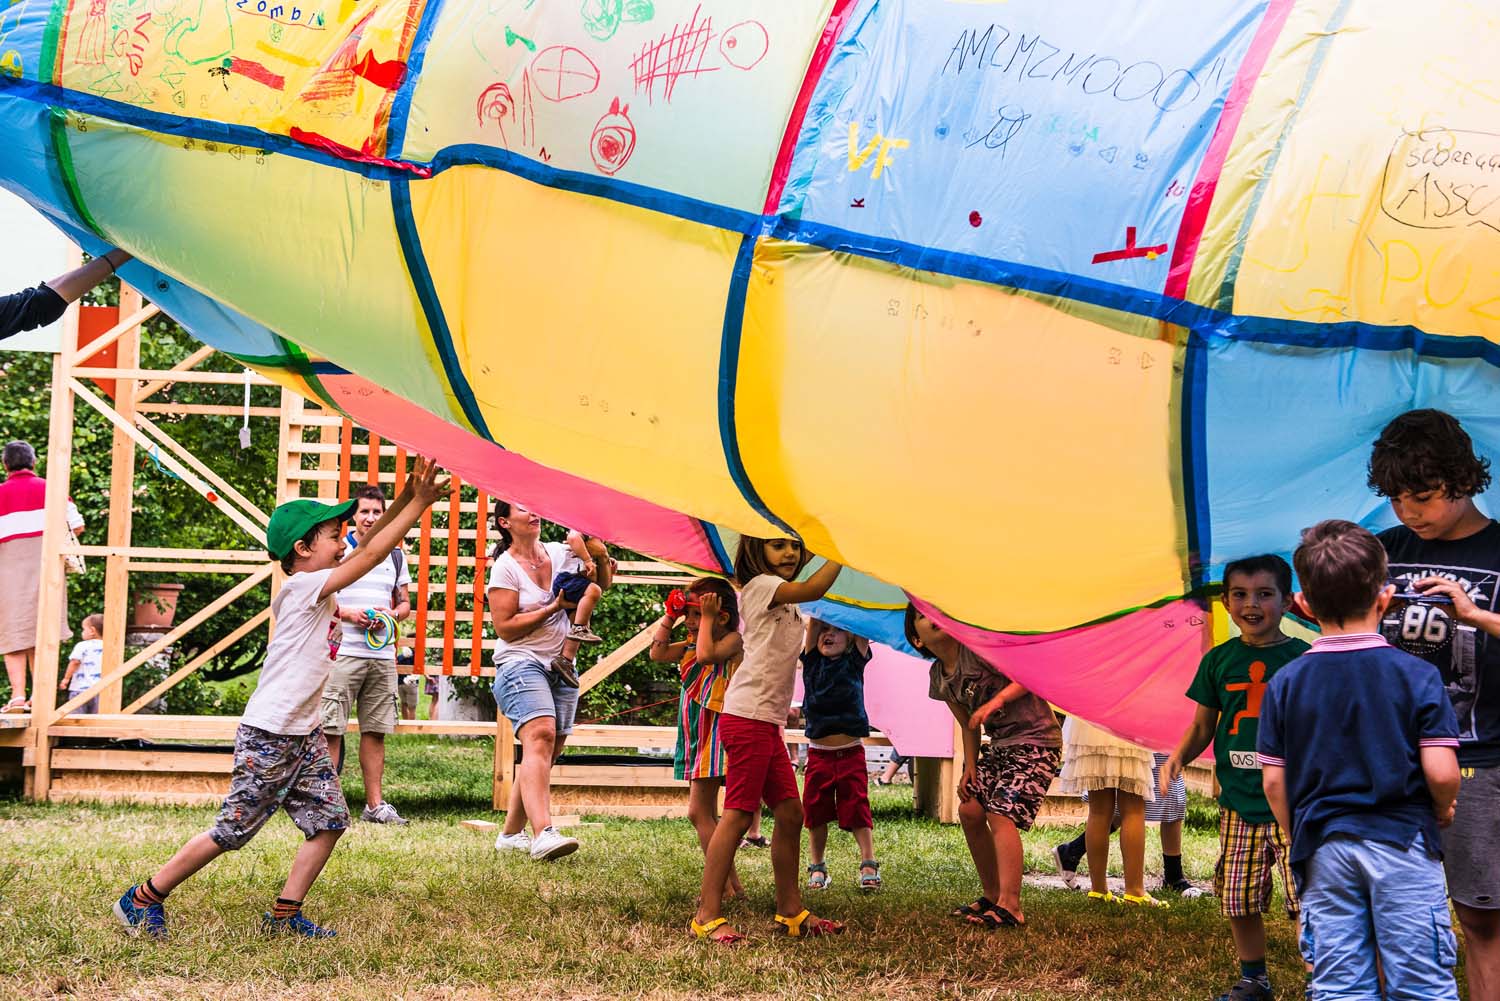 A group of young children play underneath a multi coloured inflatable object.